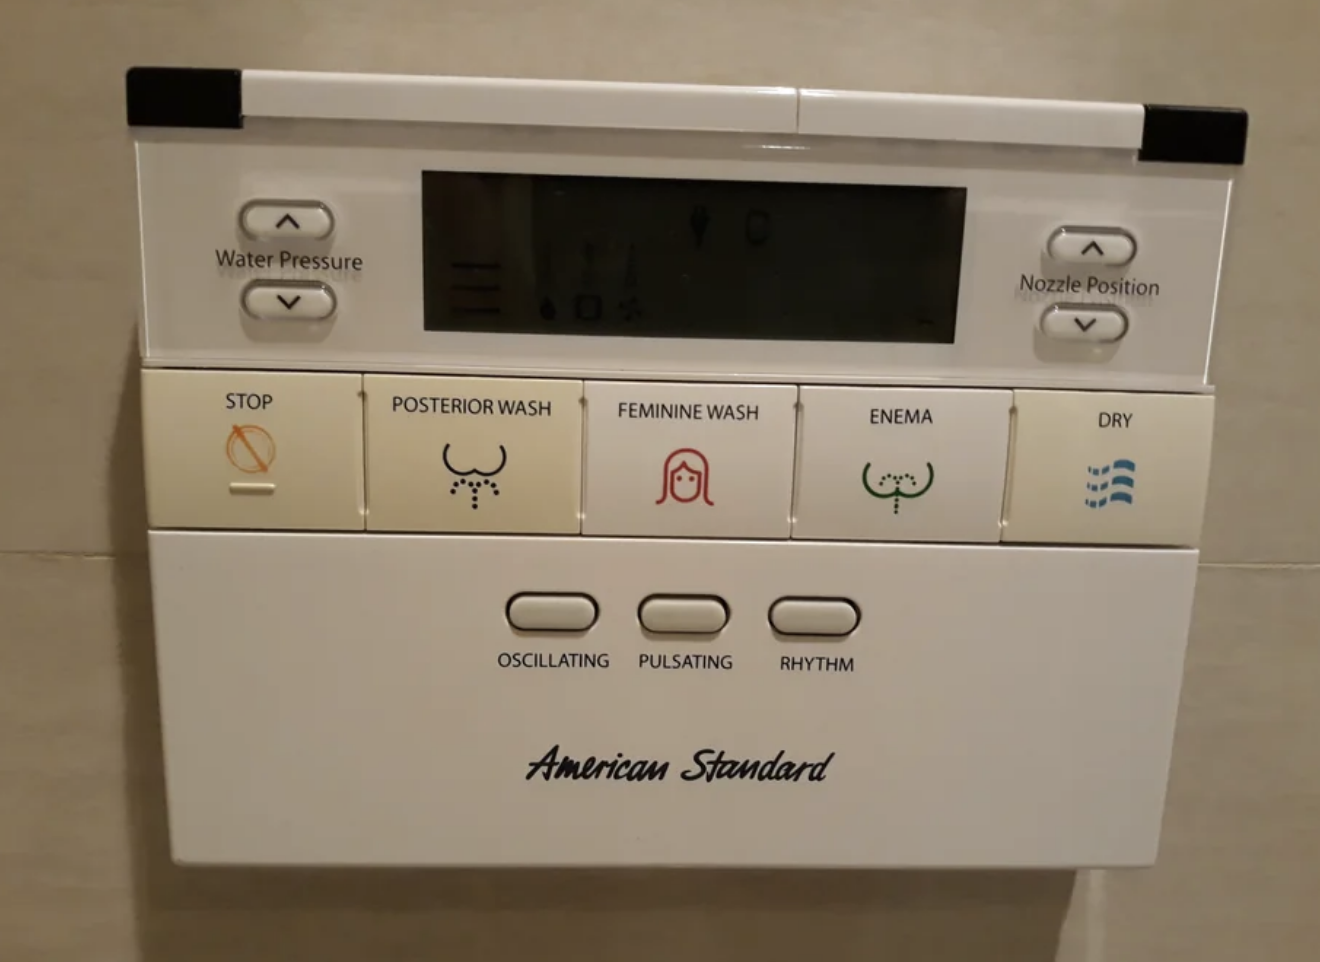 A panel for a bidet